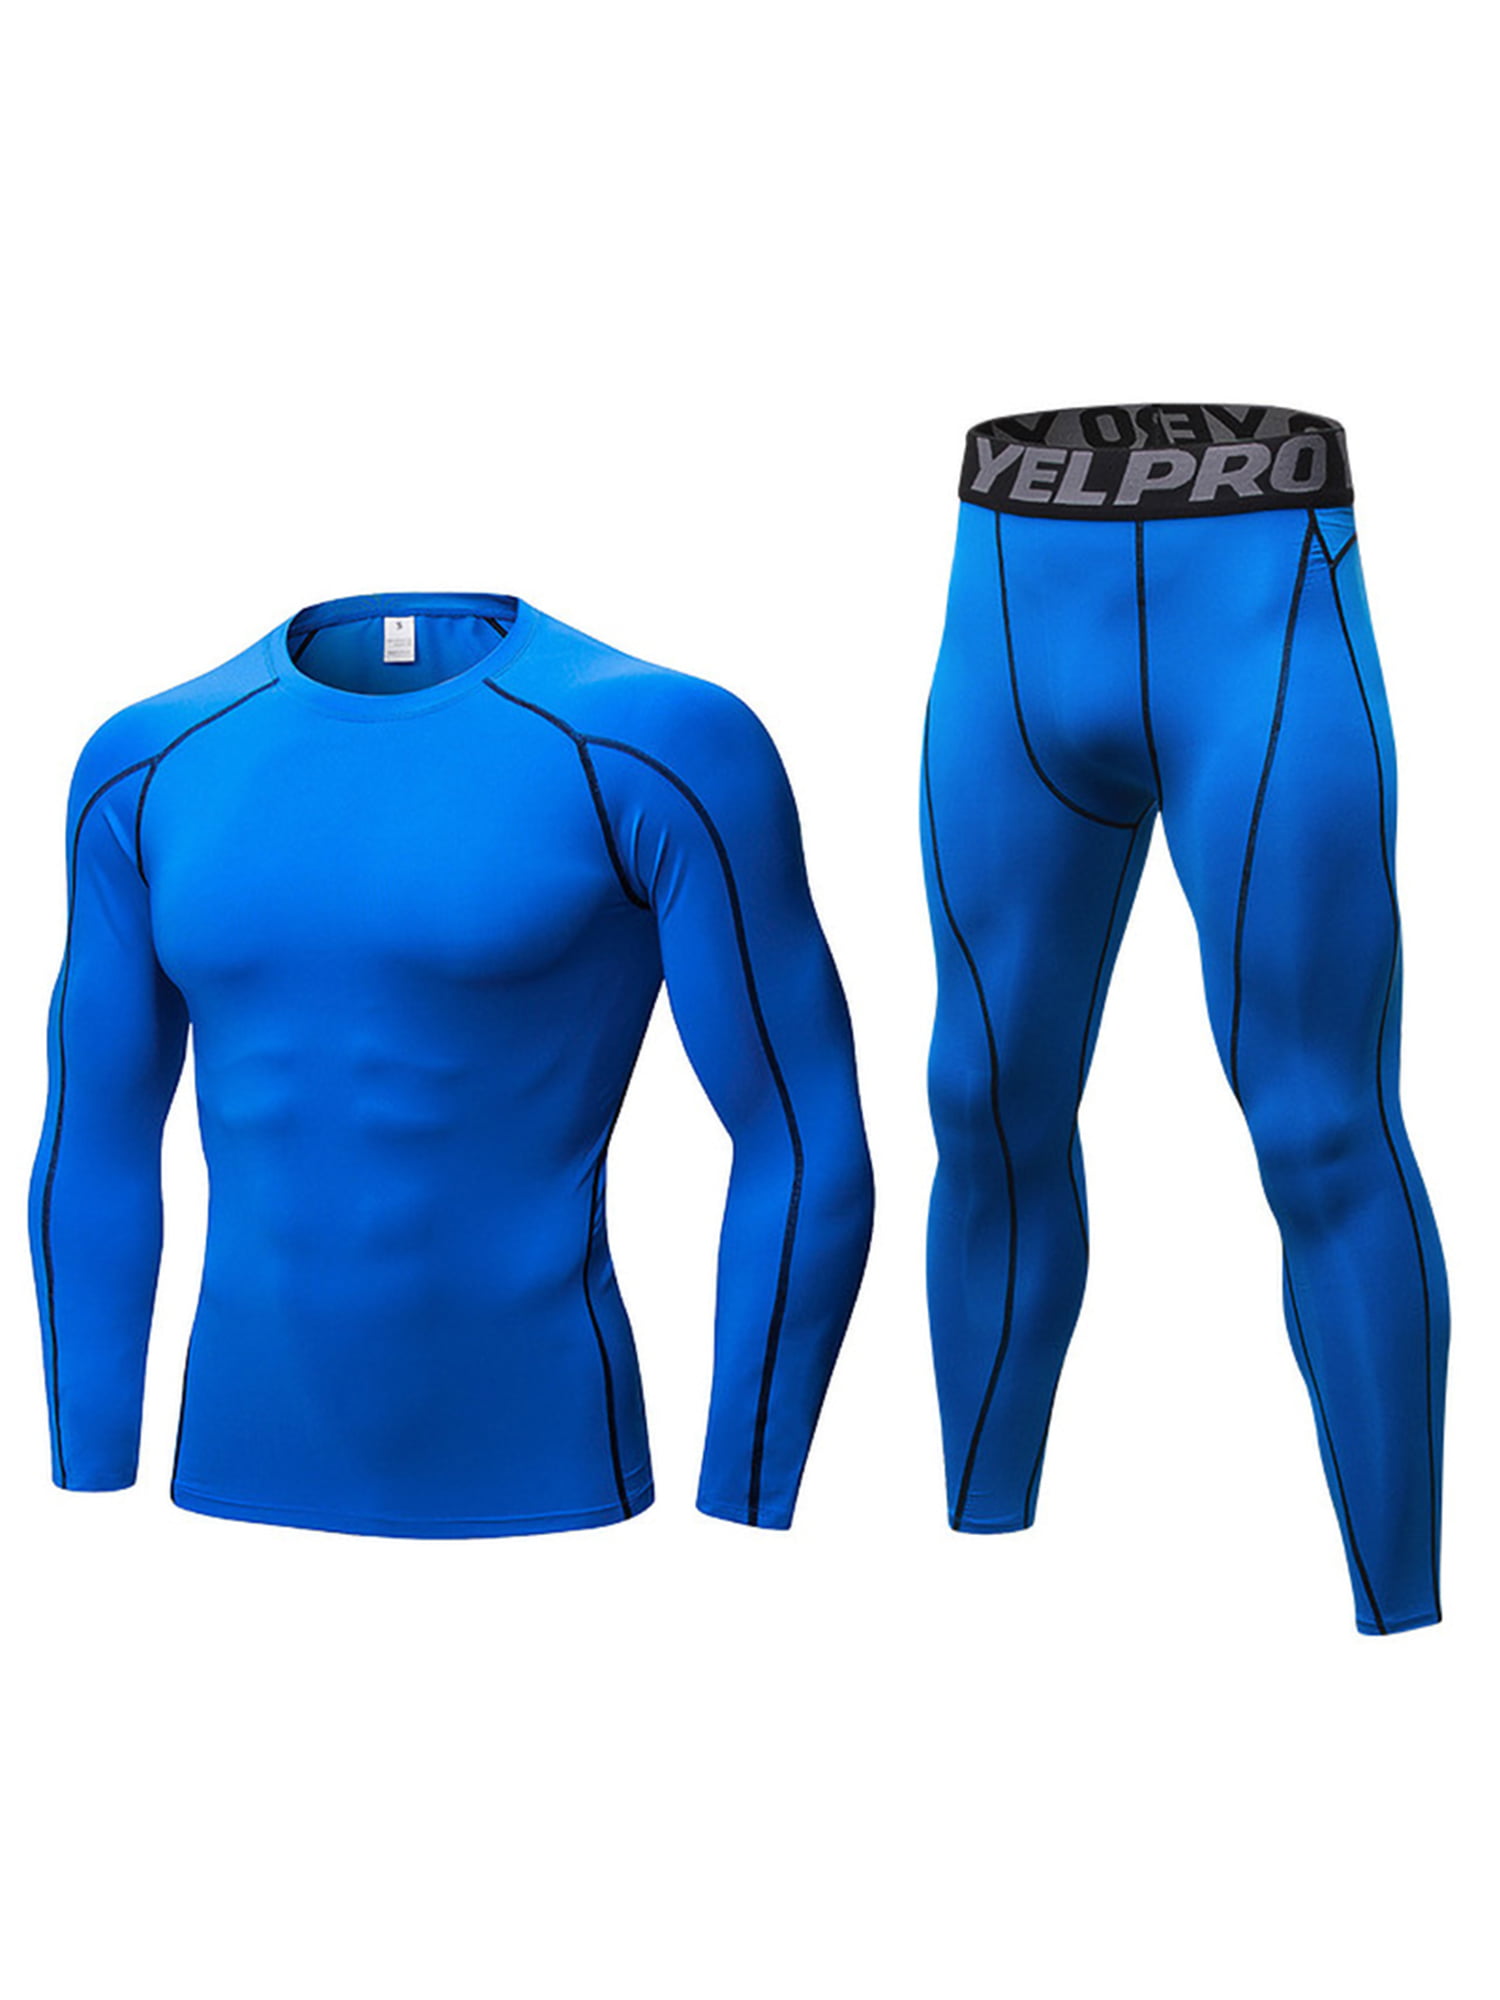 Mens Quick-Drying Tracksuit 2PC Leggings Fitness Sports Gym Athletic Pants Shirt Suit